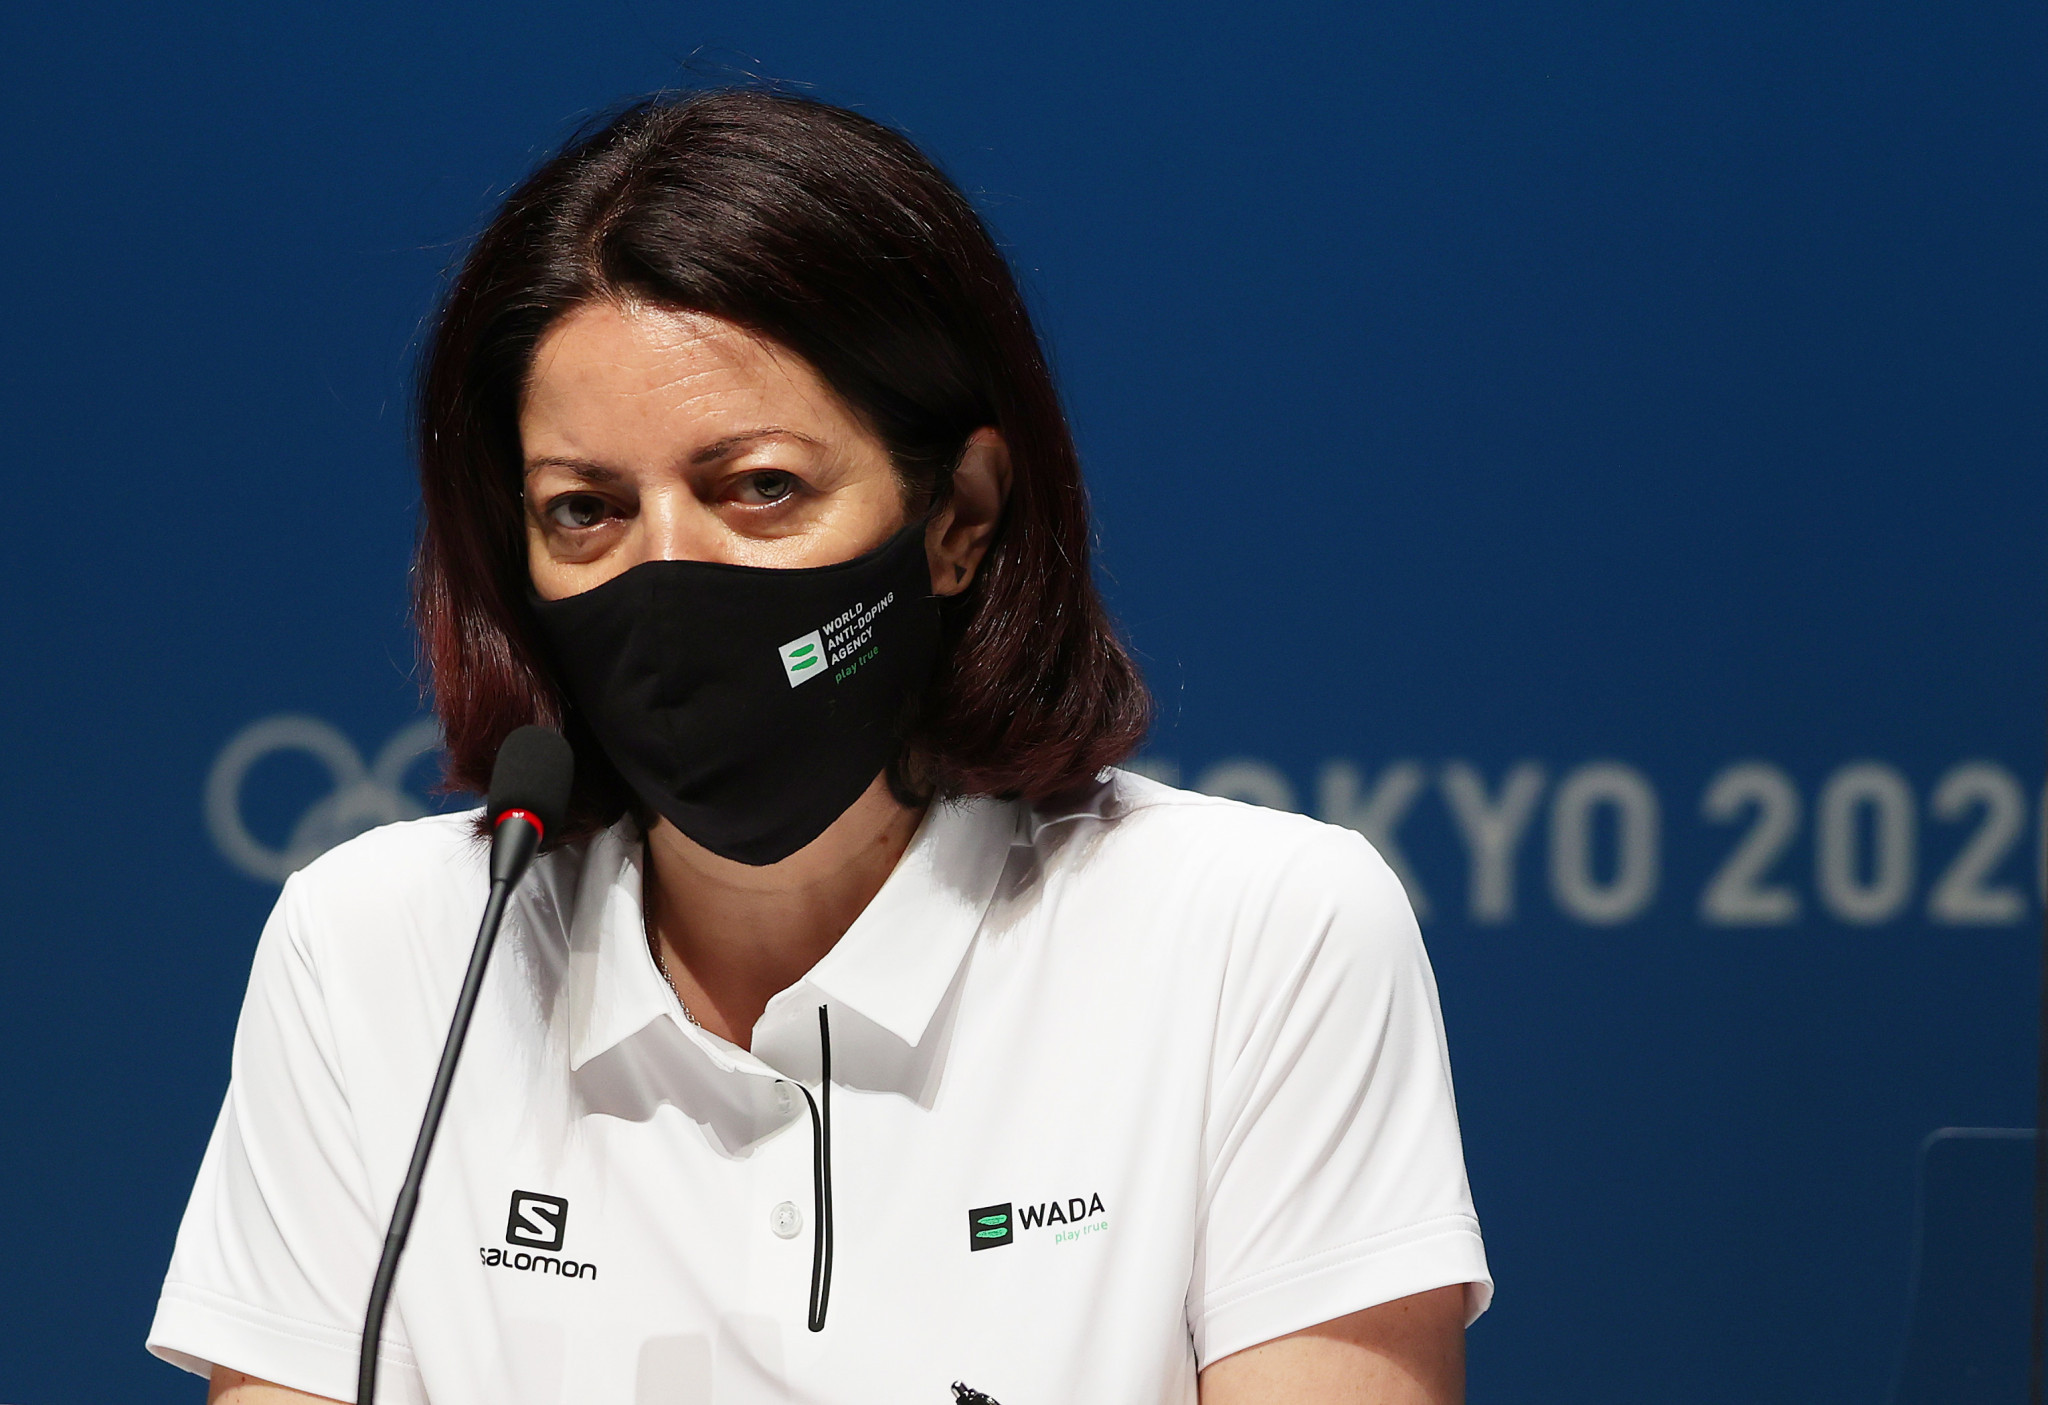 Francesca Rossi led the Independent Observer team for the Tokyo 2020 Olympics ©Getty Images